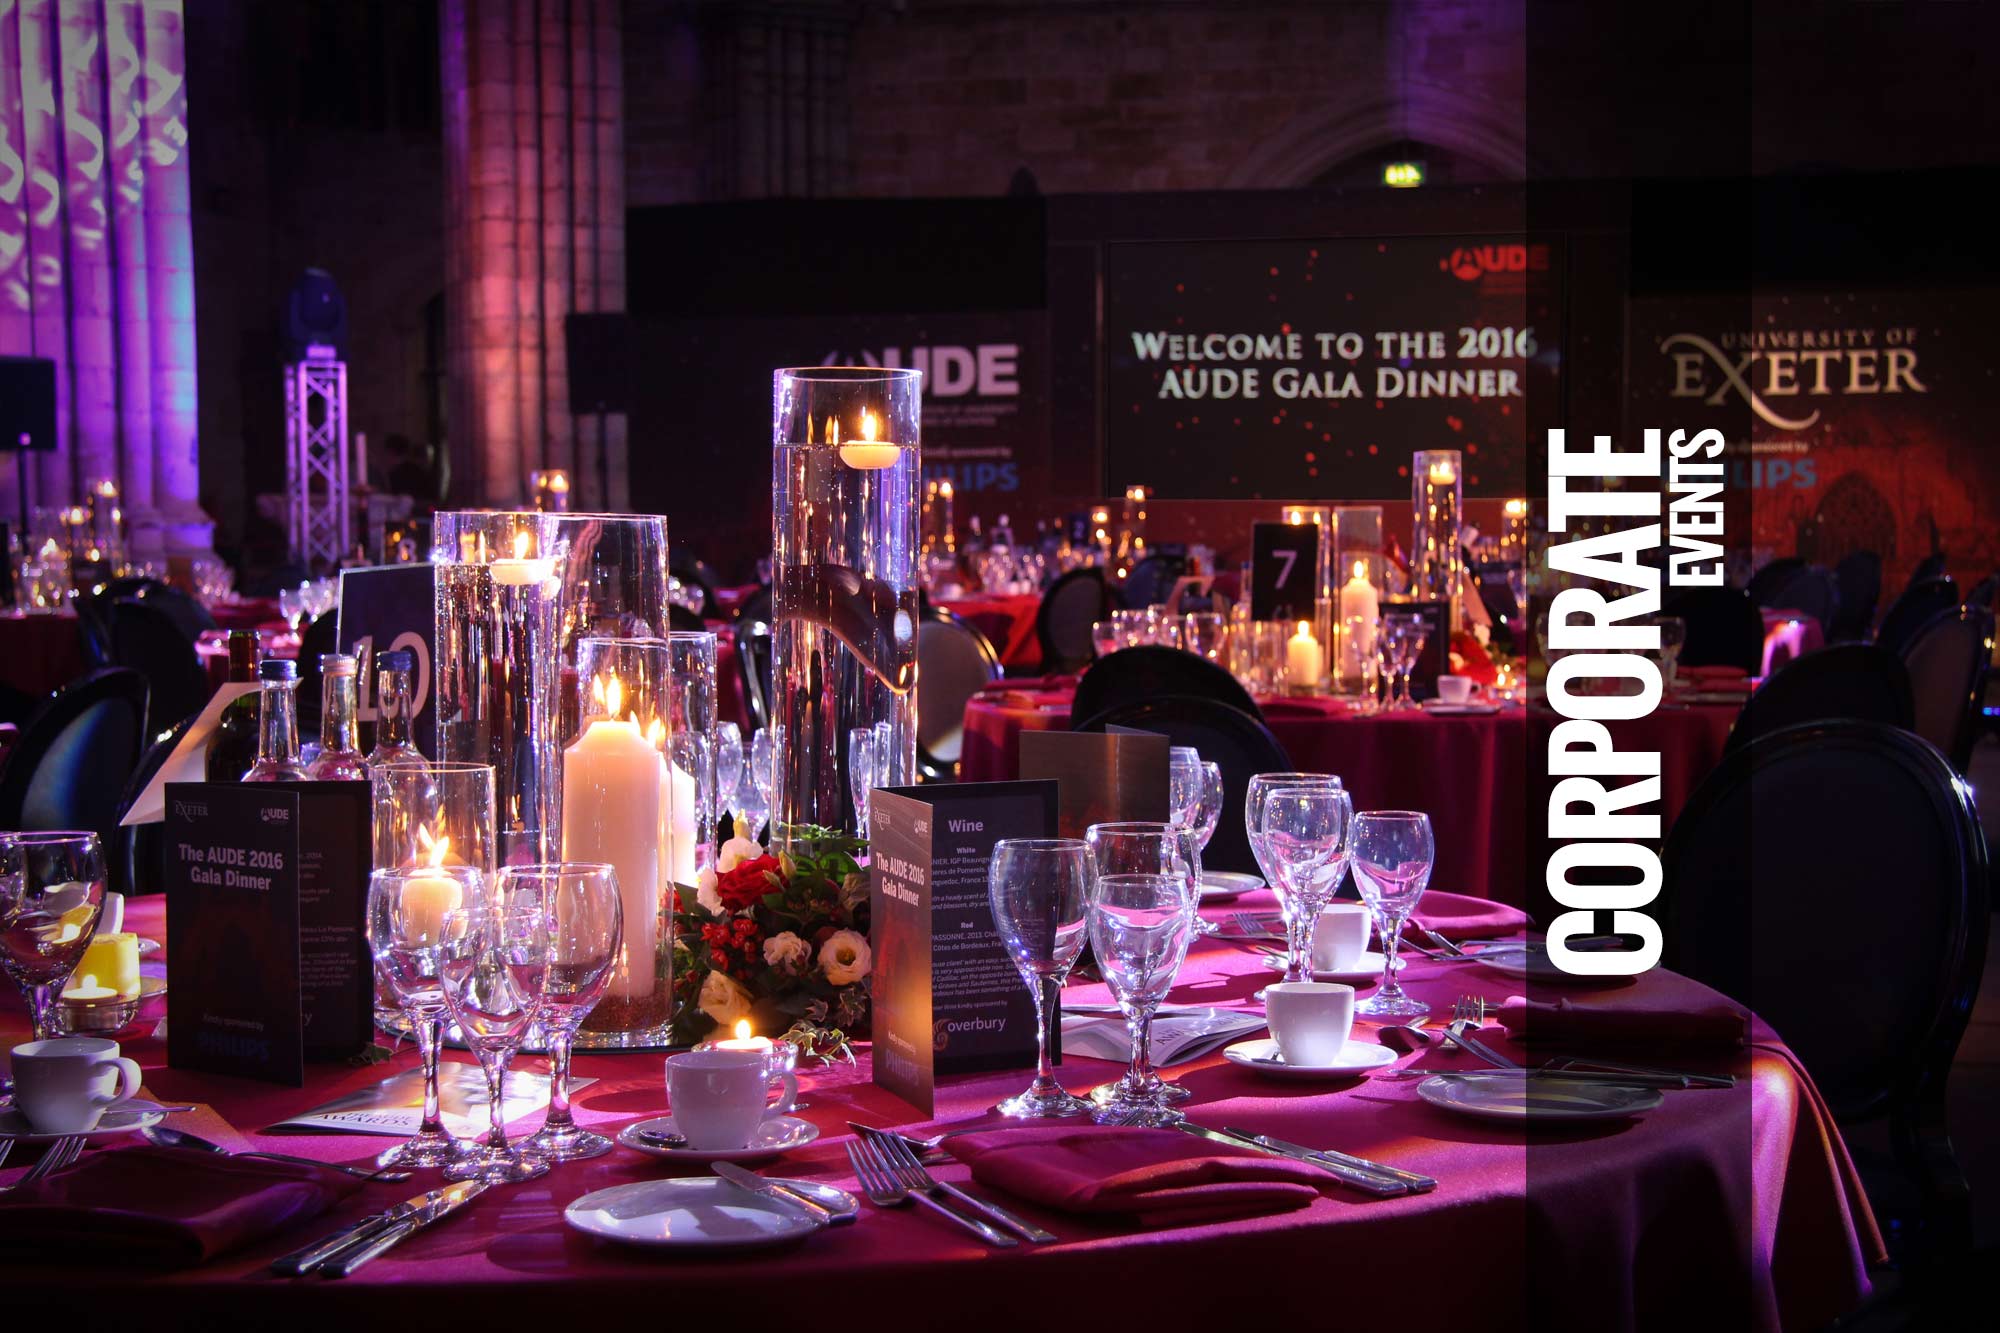 Corporate parties or events